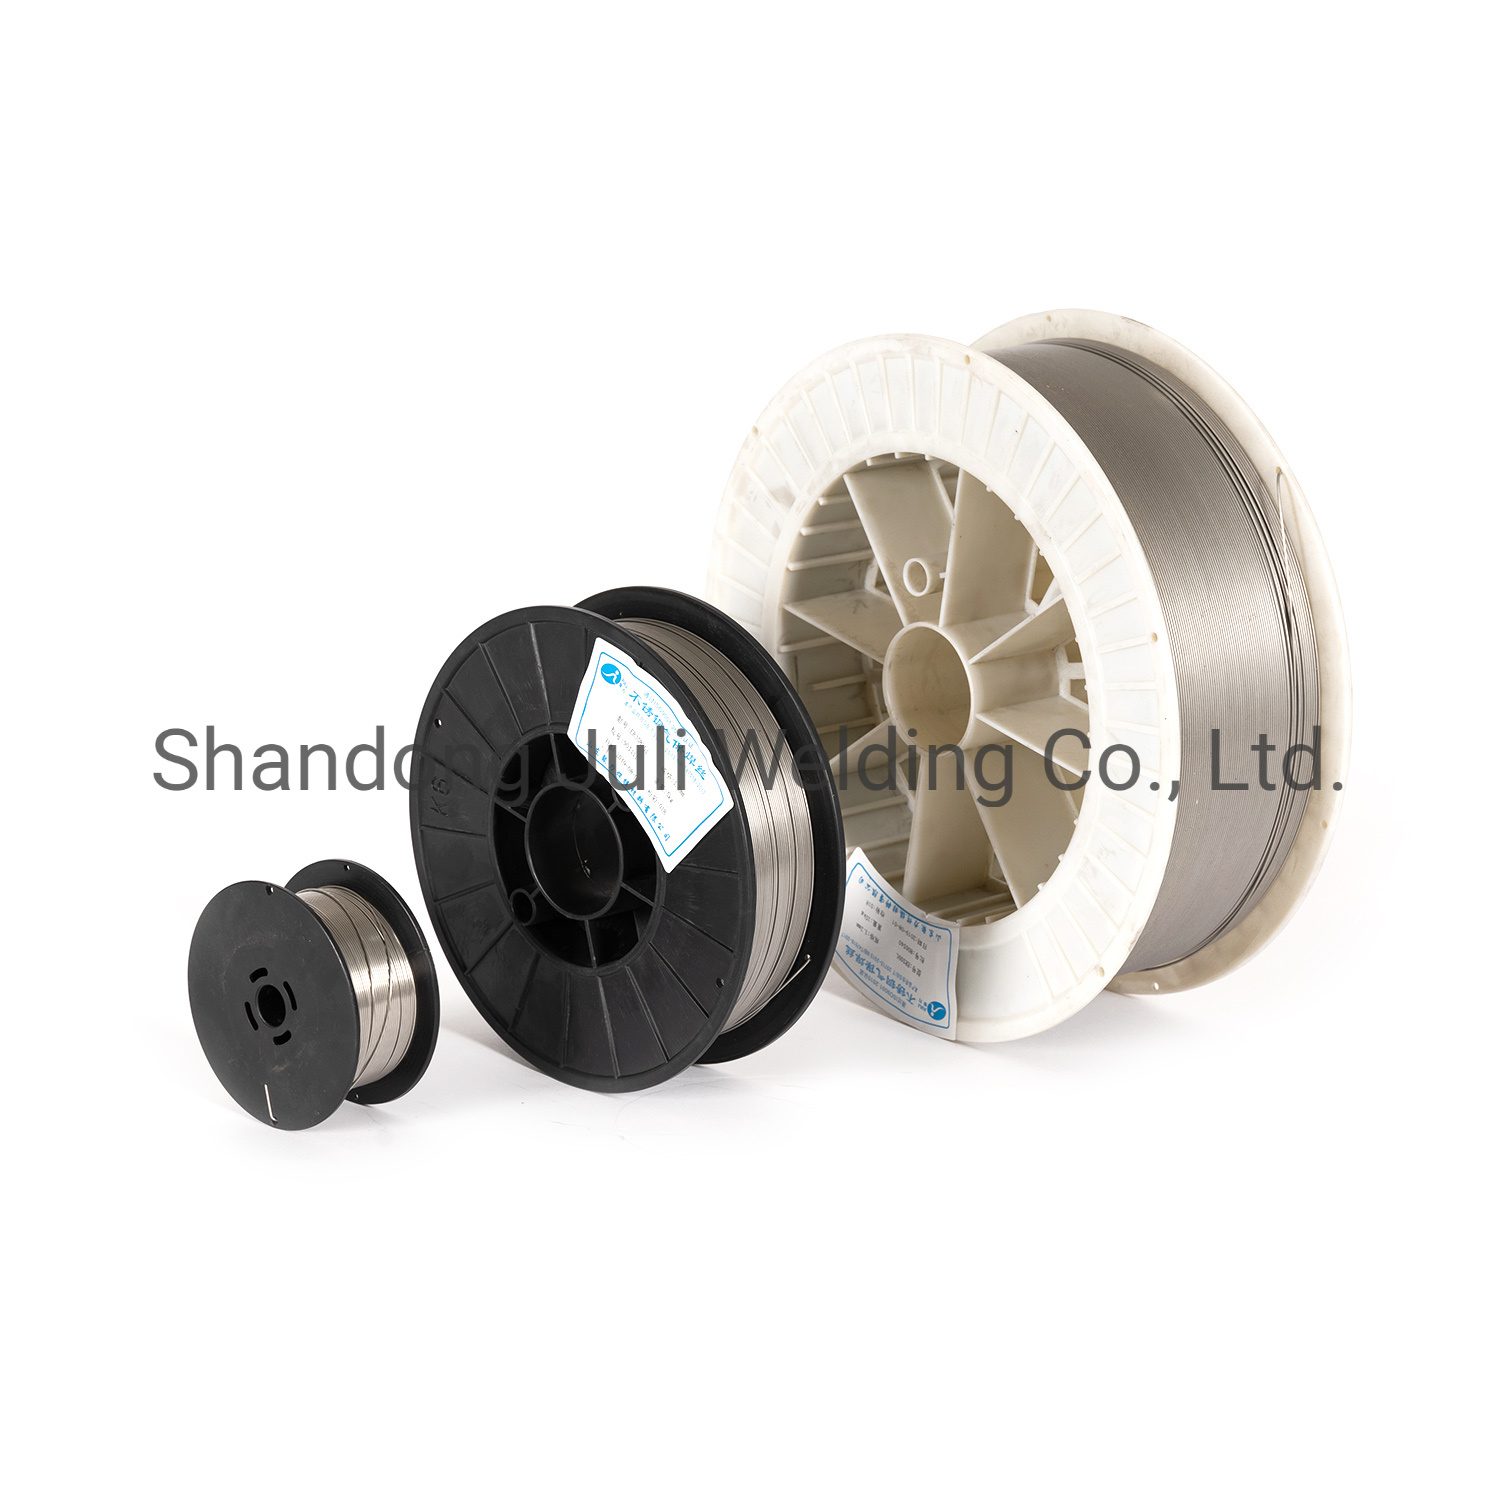 No. 1 Exporter Ss Stainless Steel Welding Wire